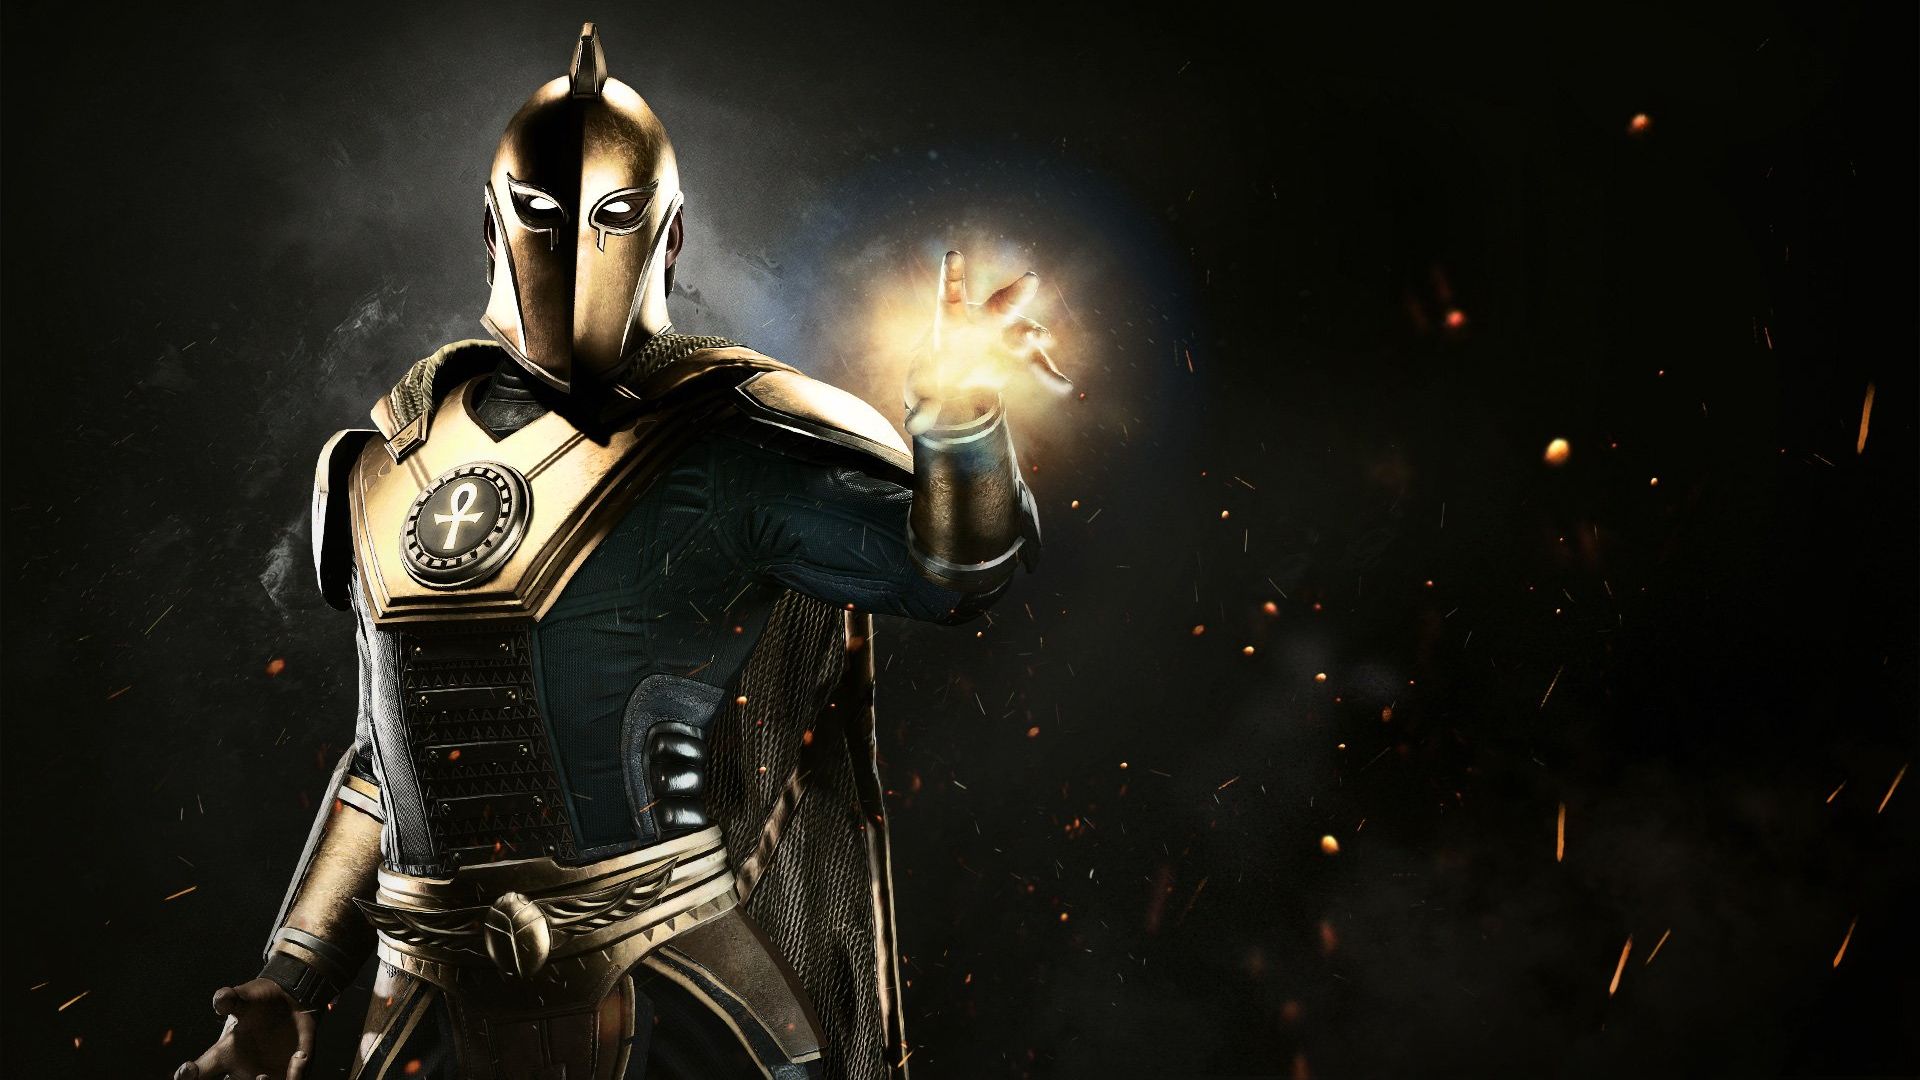 Wallpaper Doctor Fate, Injustice 2 video game wallpaper